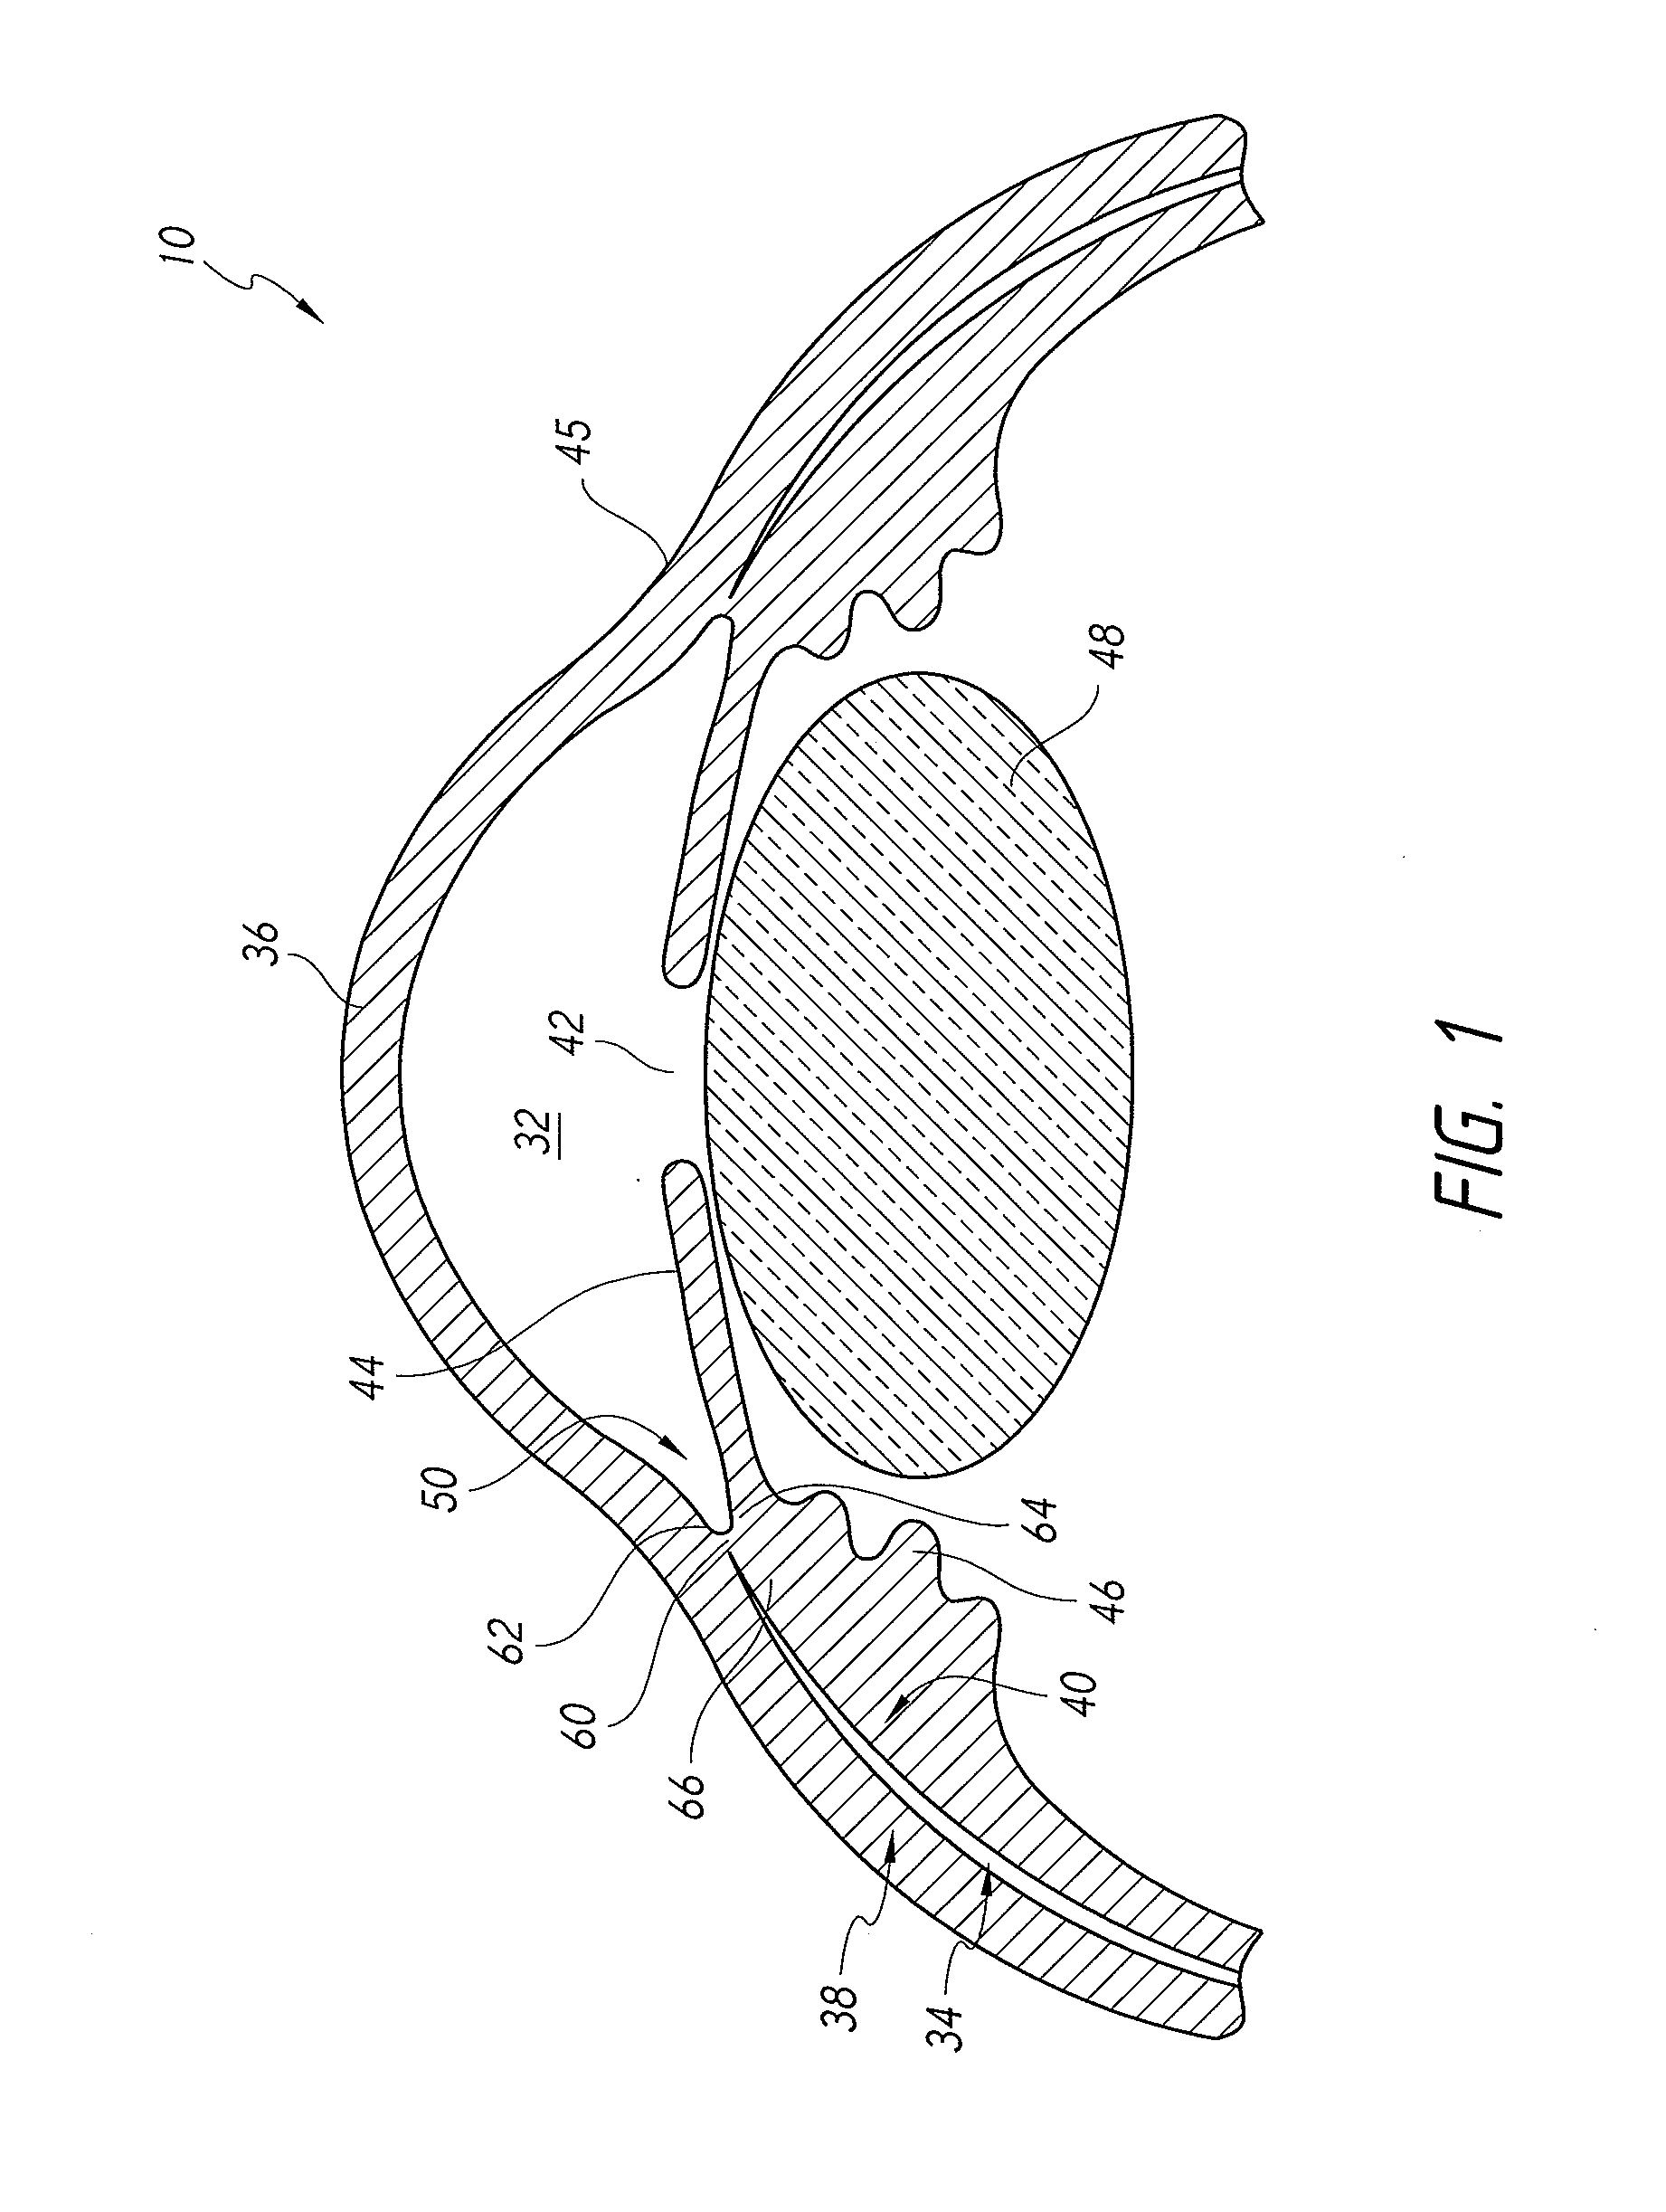 Systems and methods for delivering an ocular implant to the suprachoroidal space within an eye